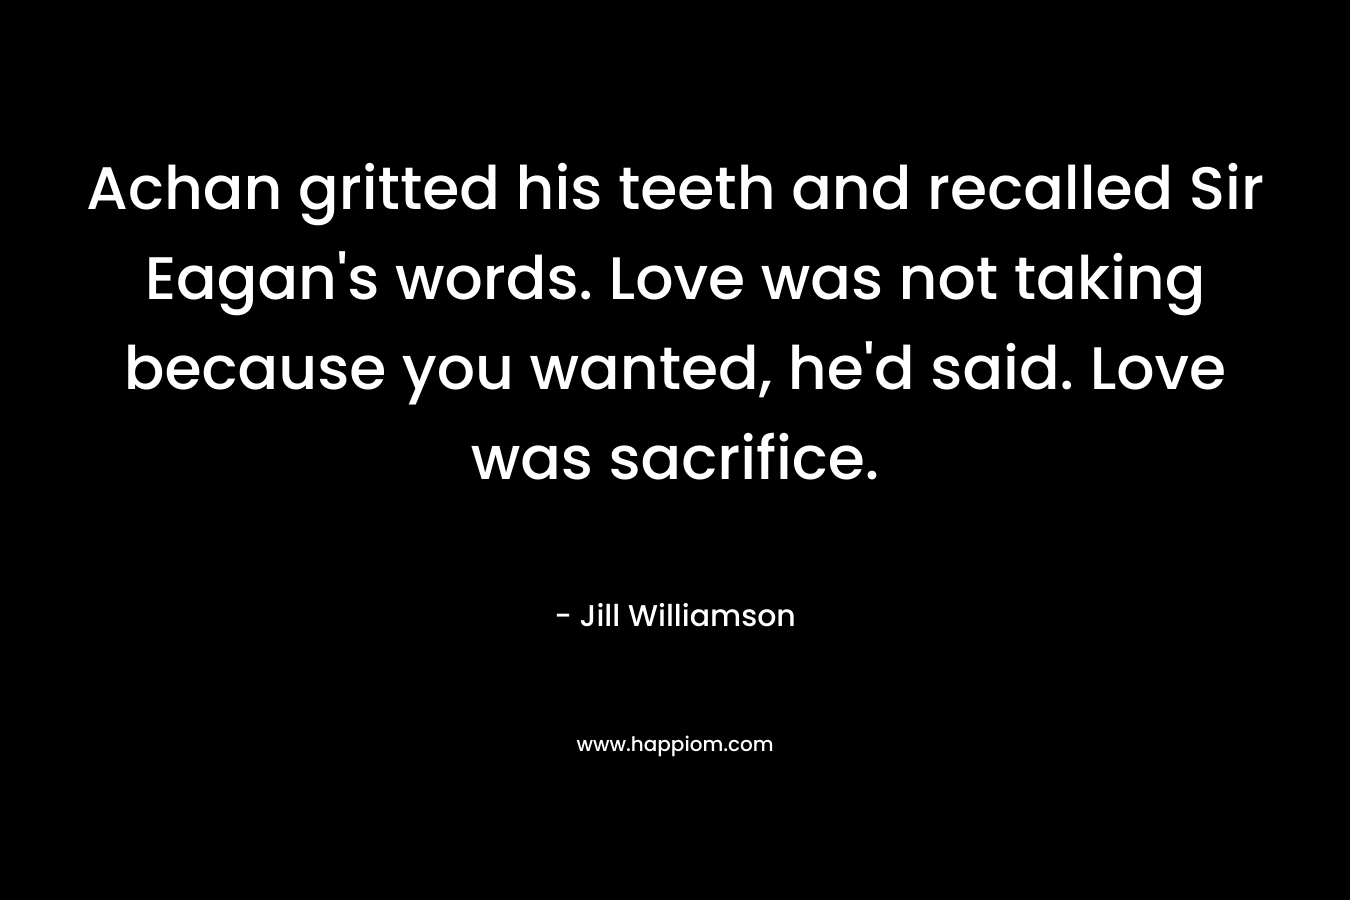 Achan gritted his teeth and recalled Sir Eagan’s words. Love was not taking because you wanted, he’d said. Love was sacrifice. – Jill Williamson